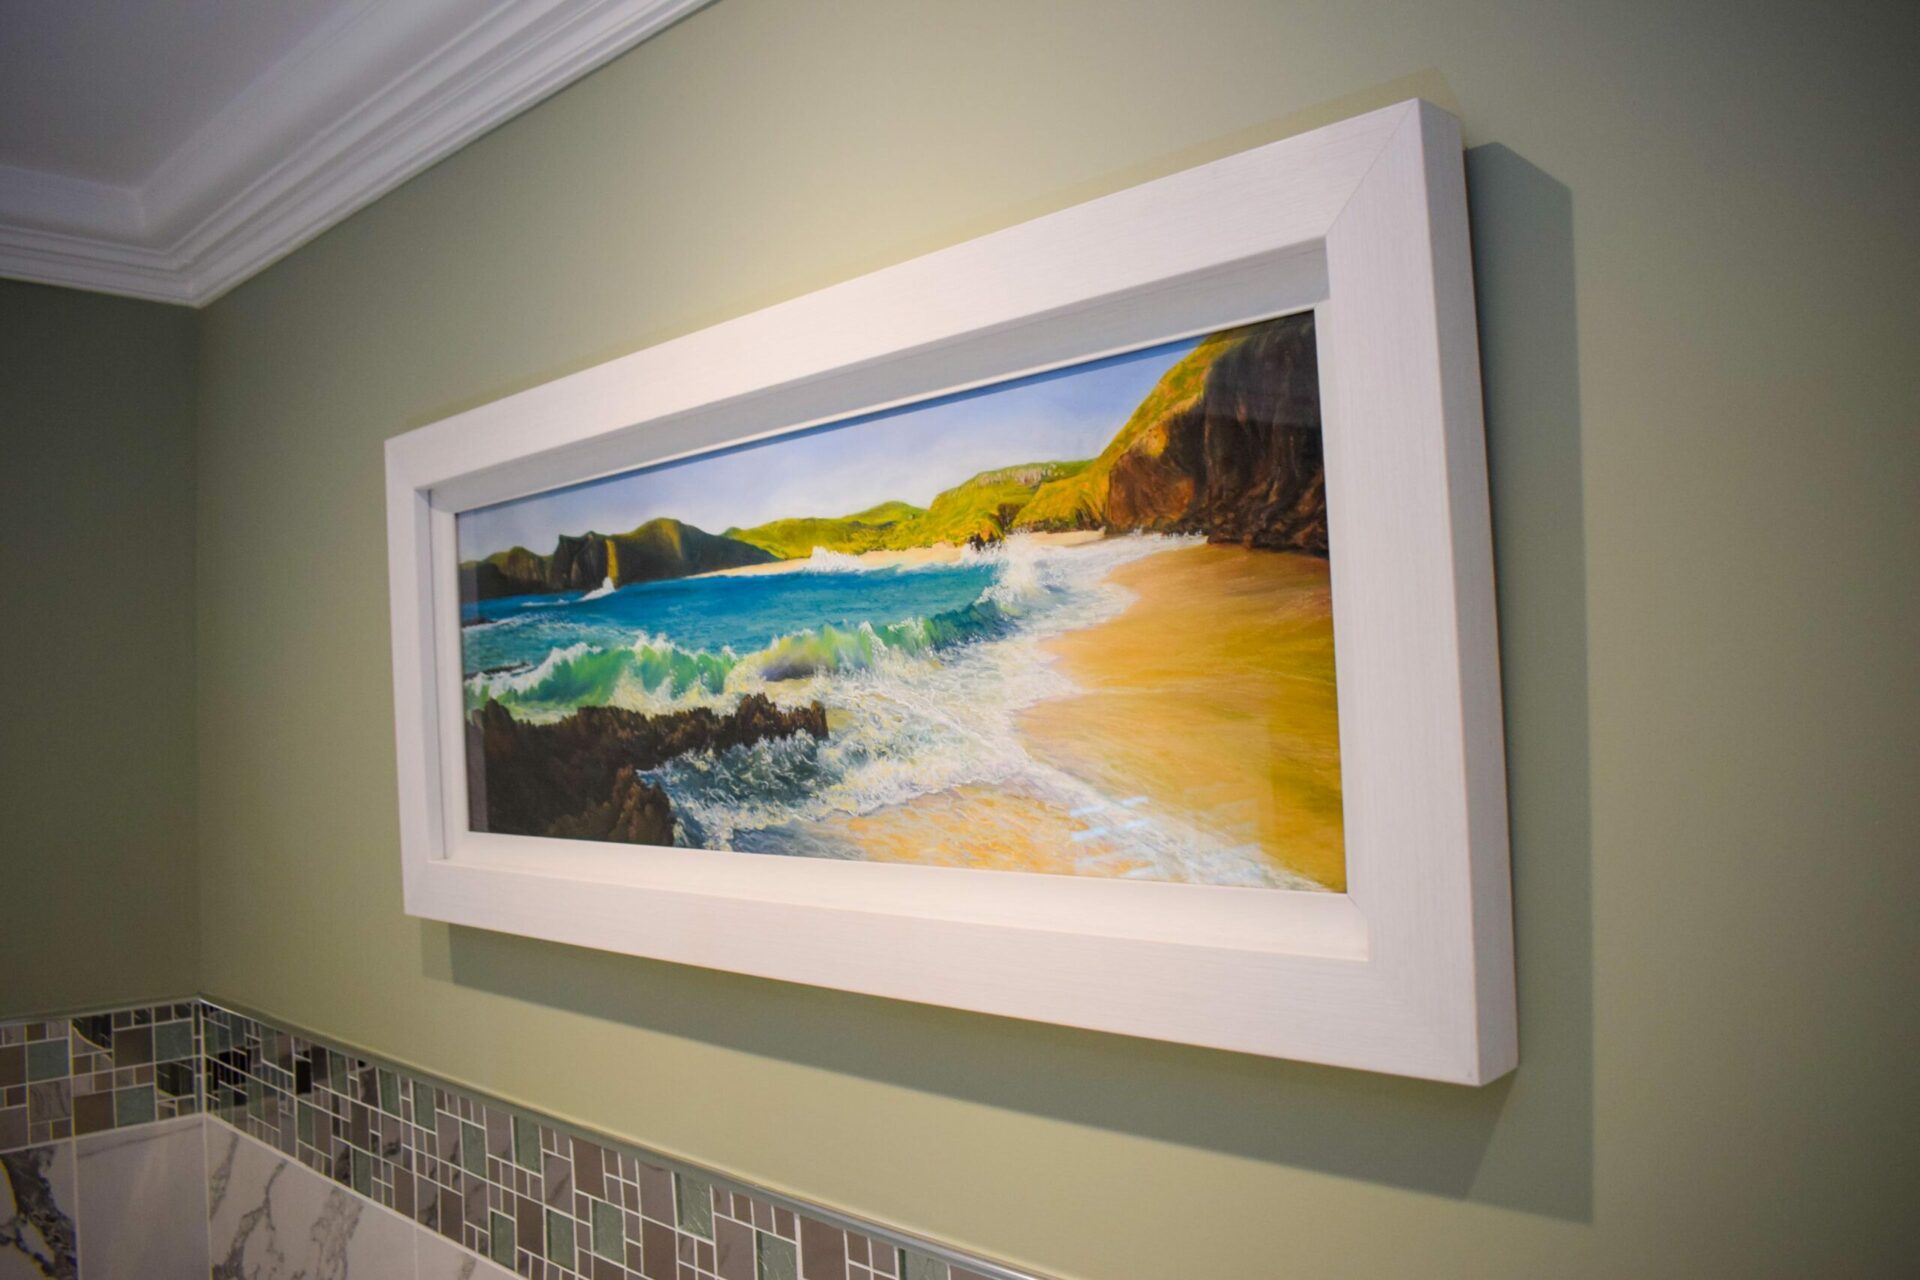 Relax in the bath of our Skyfall Hideaway gazing up at this delightful seascape